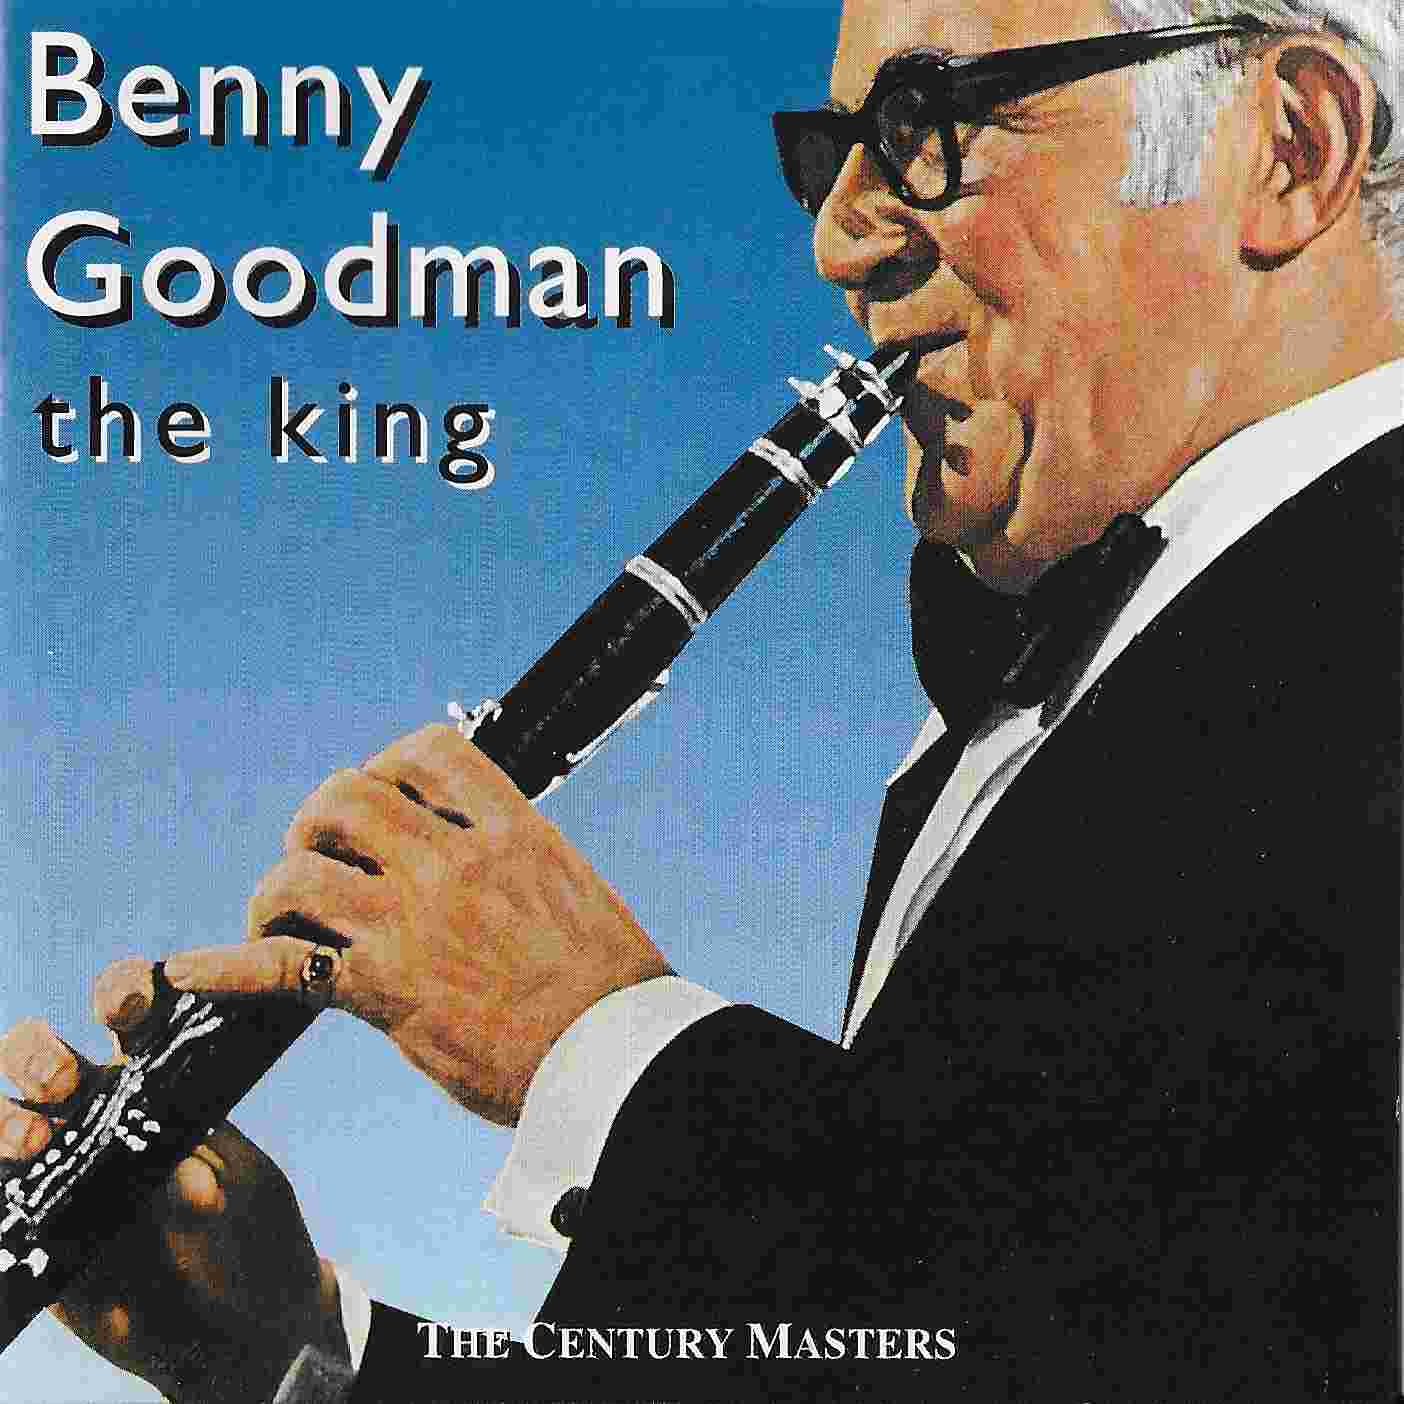 Picture of The Century Catalogue - The king by artist Benny Goodman from the BBC cds - Records and Tapes library